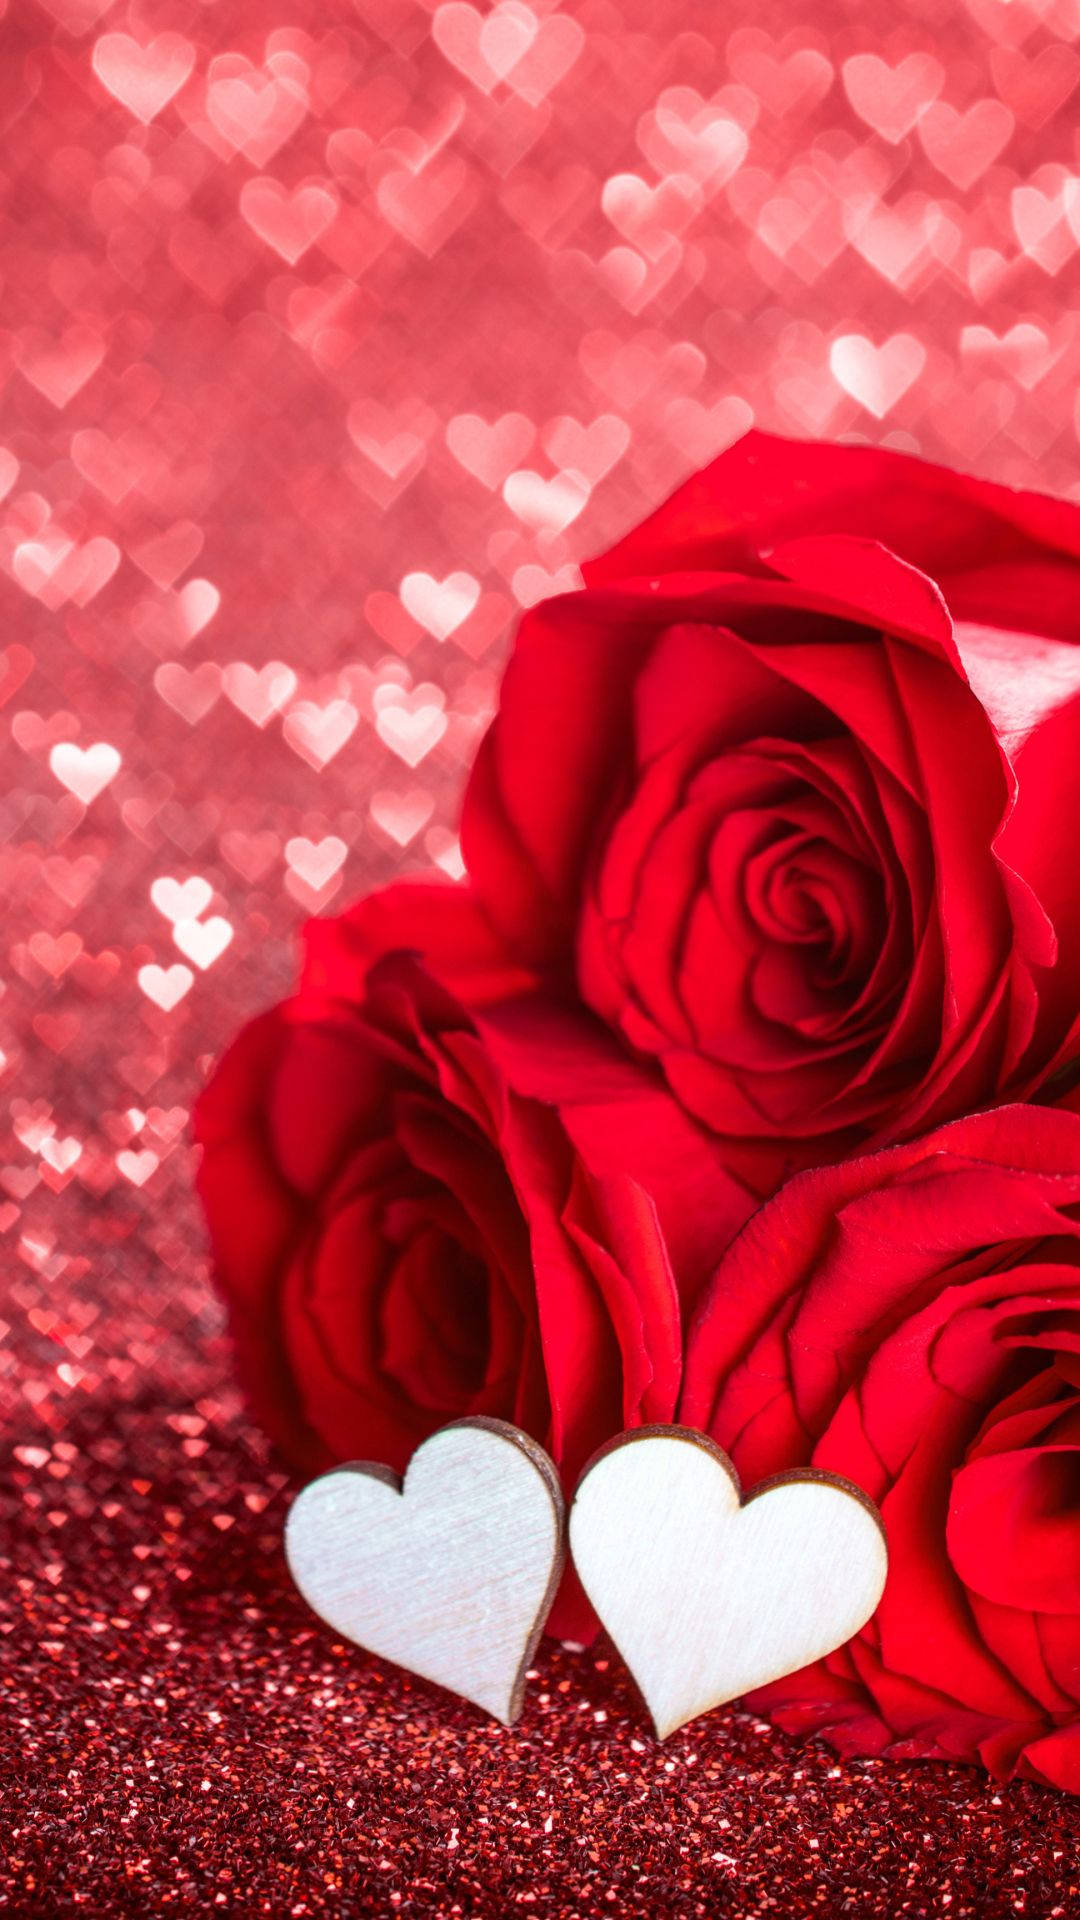 Download Romantic Rose With White Hearts Wallpaper 